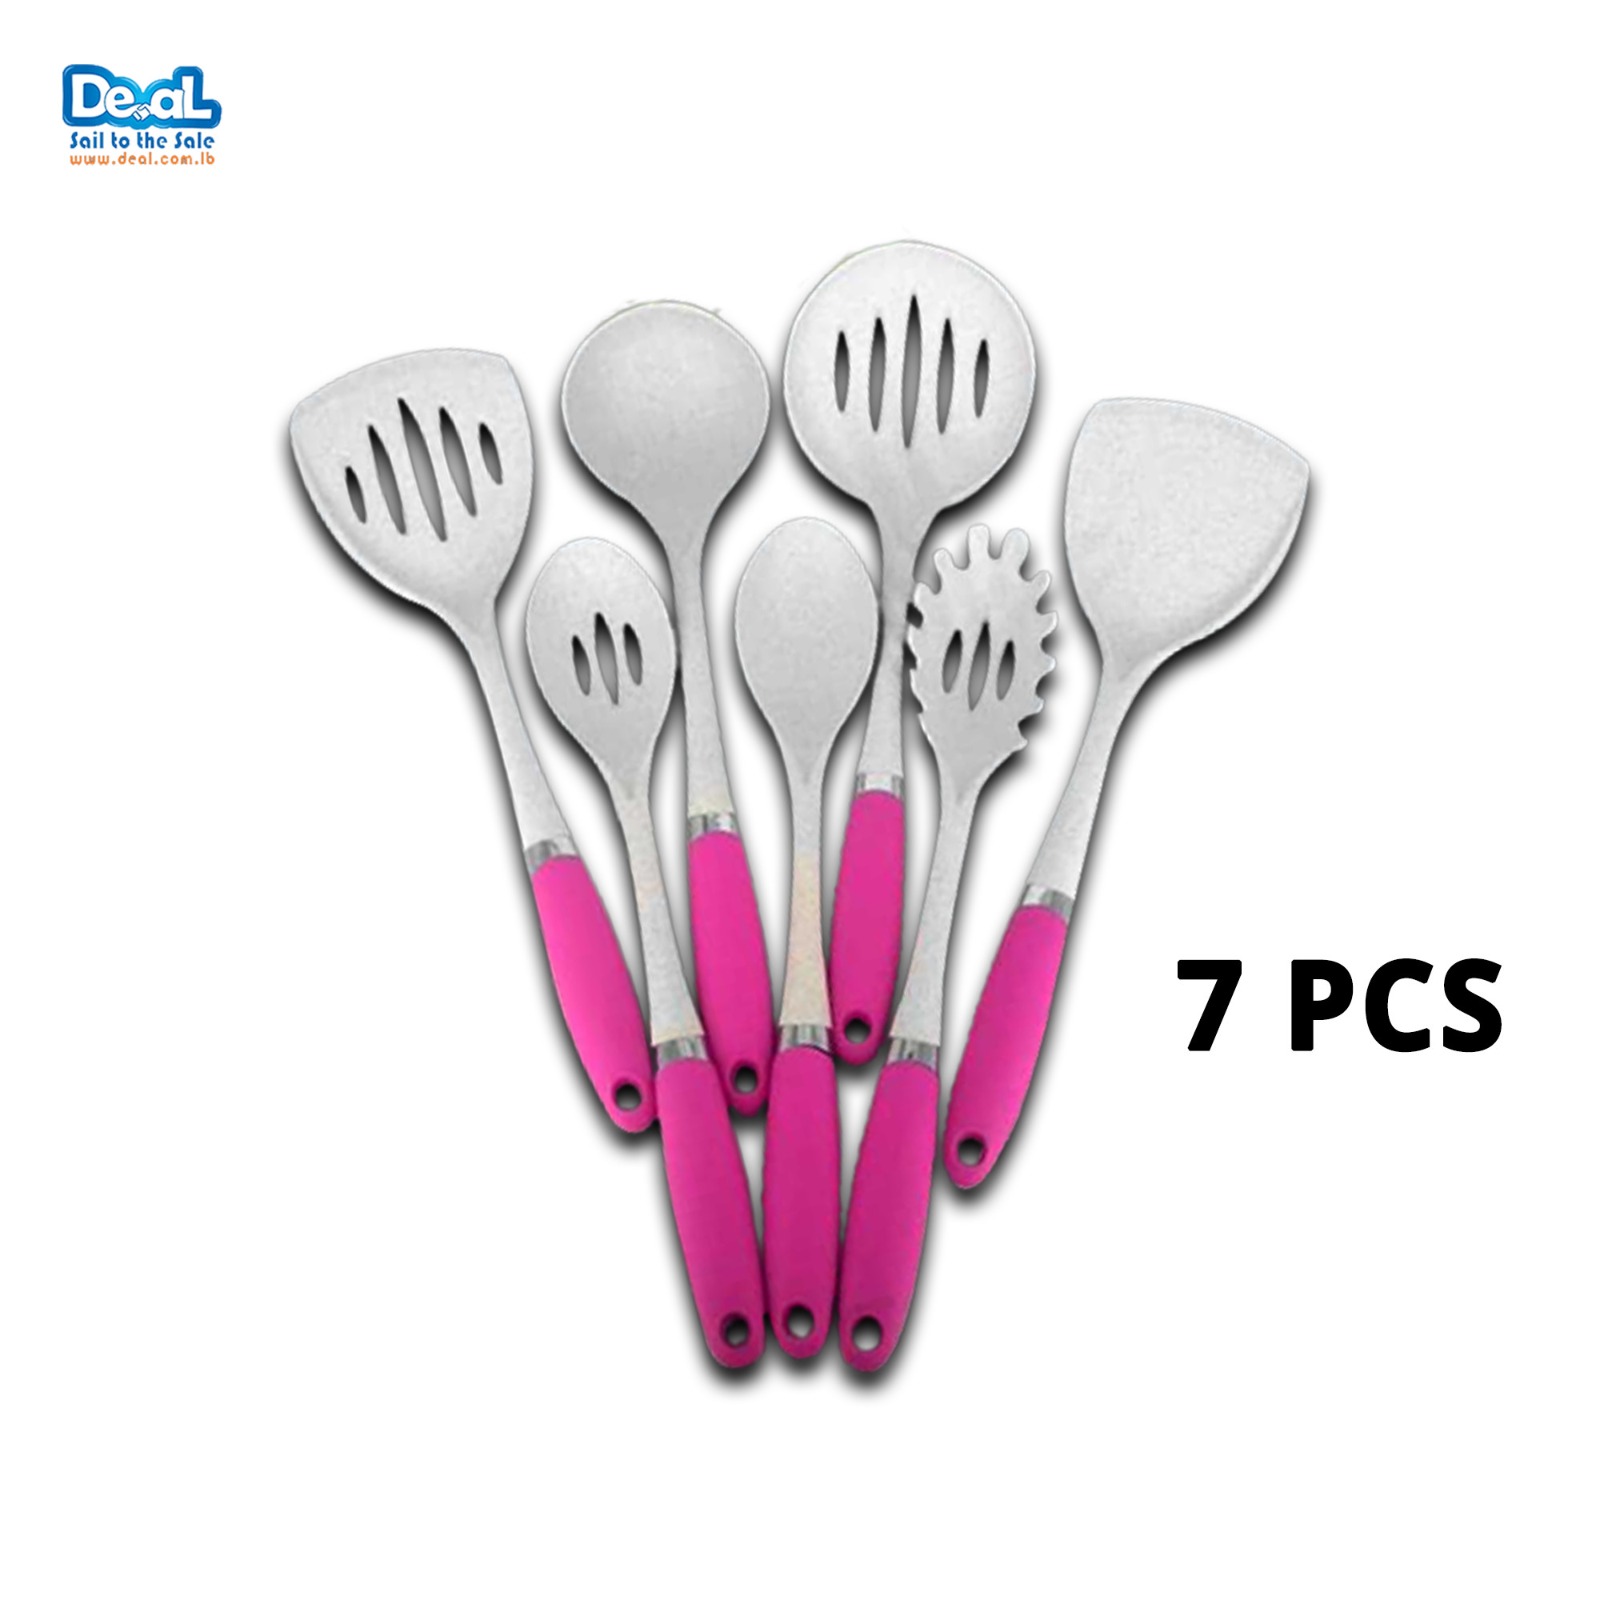 7Pcs Large Spatulas non-stick Easy To Clean Silicone Handle